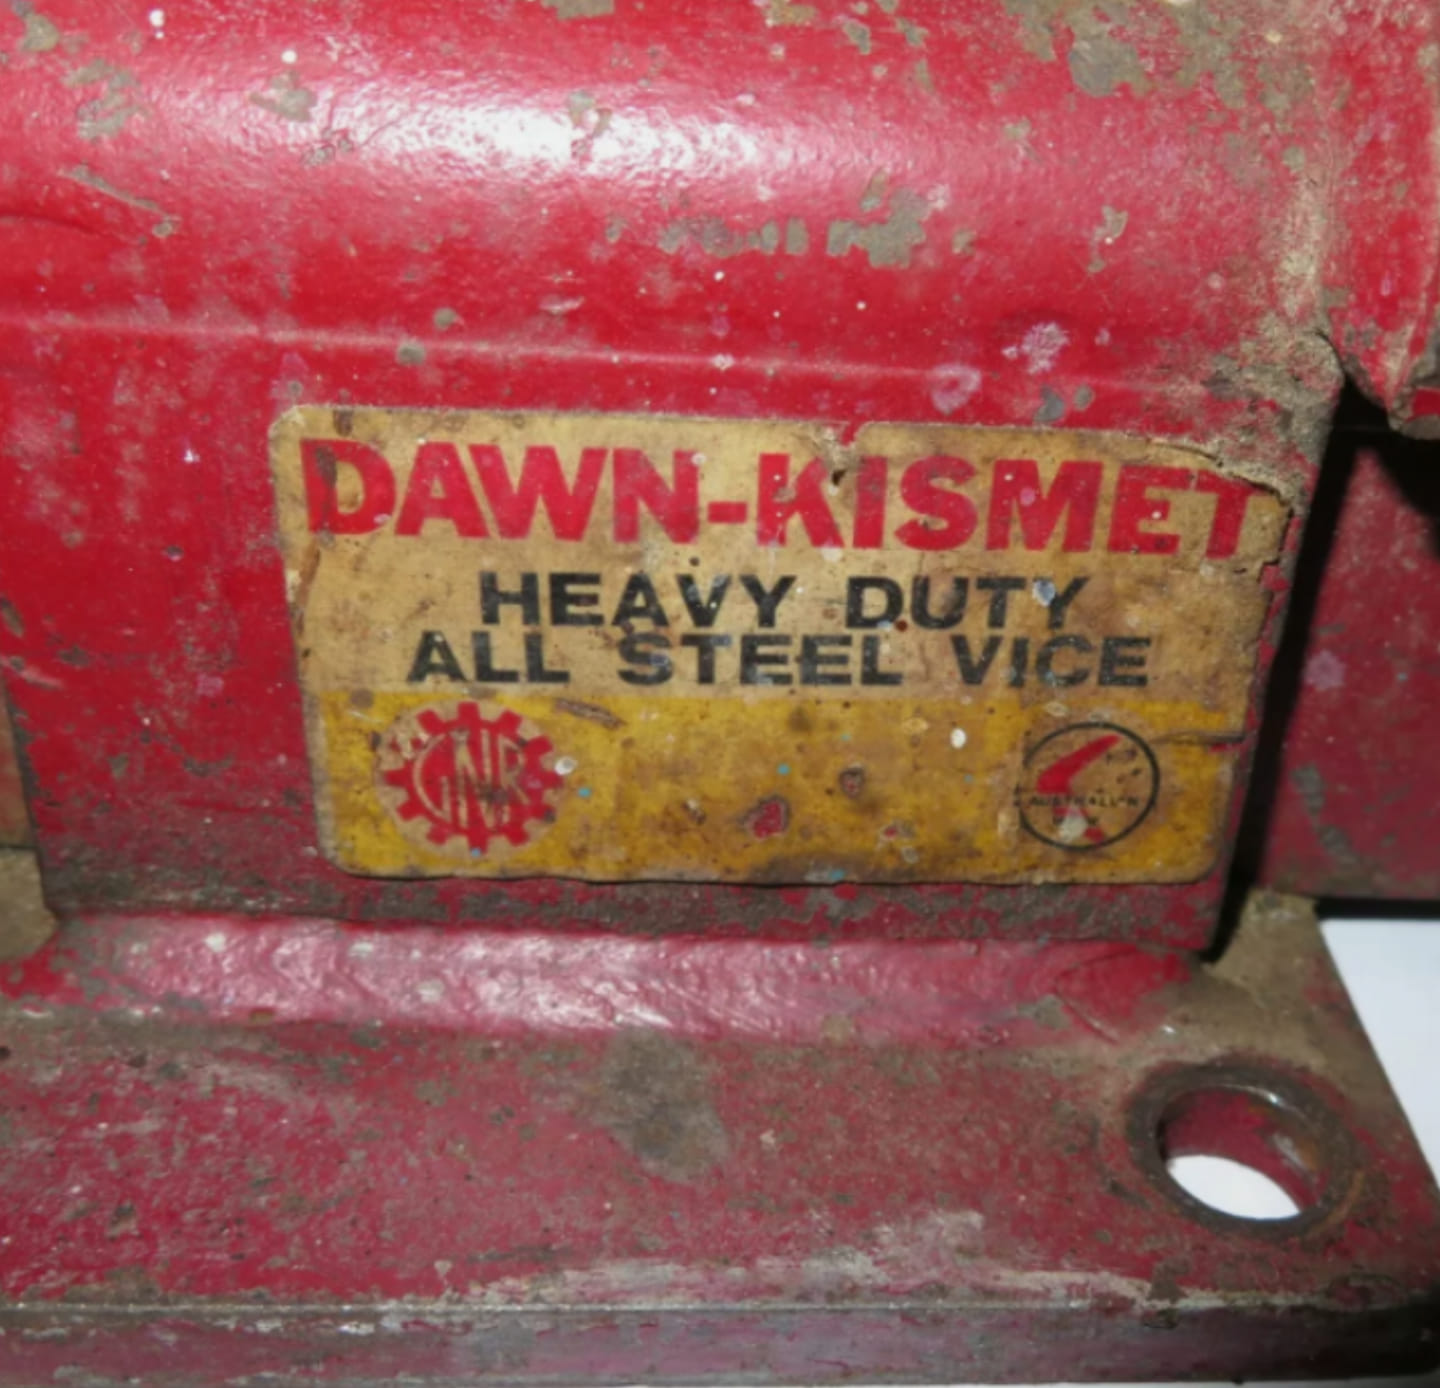 Here is an advertisment showing a Dawn-Kismet vice